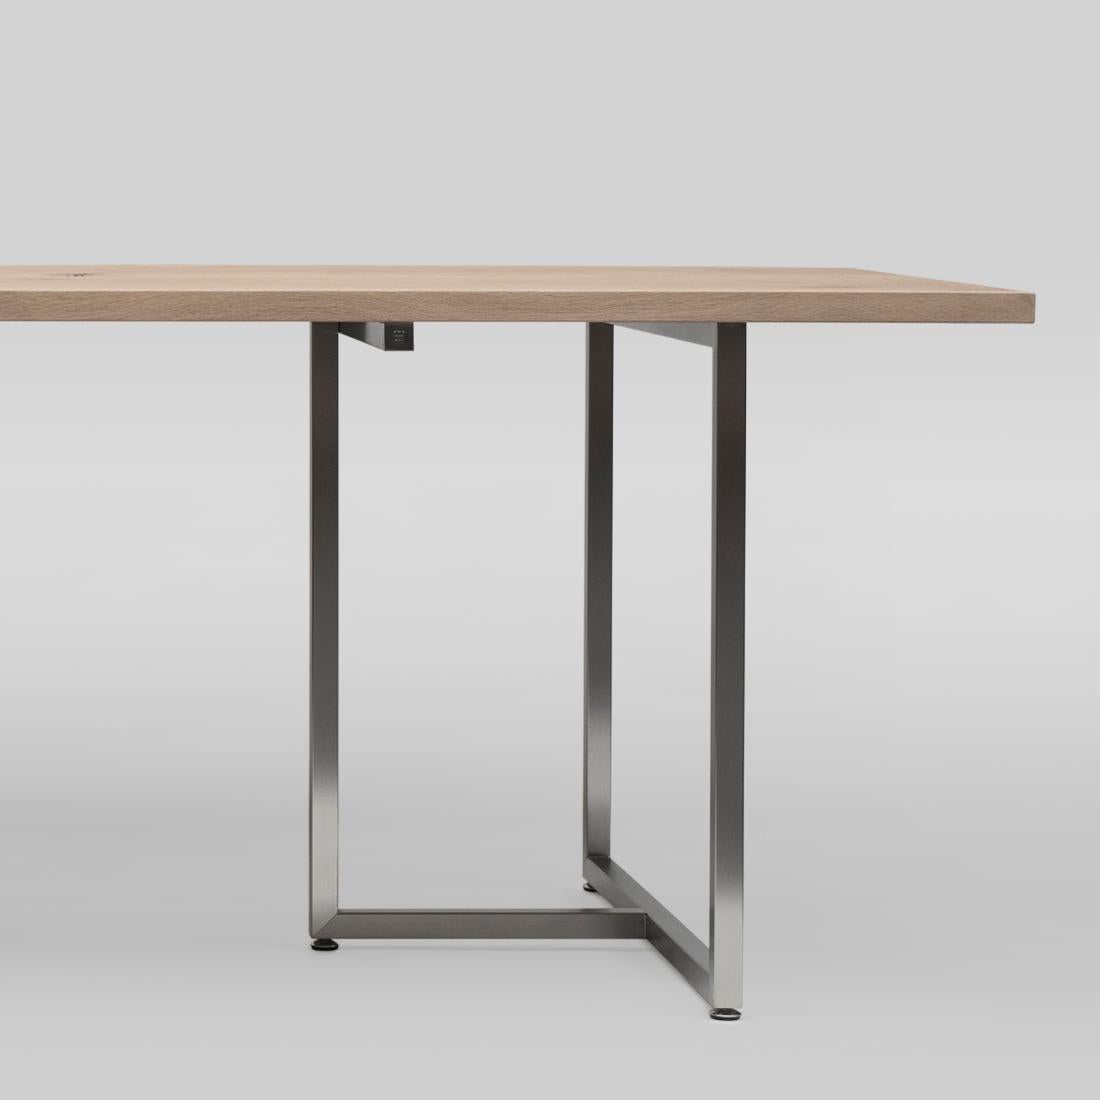 Table designed by Peter Ghyczy.
Manufactured by Ghyczy (Netherlands)

A markedly signature piece, this design features two solid, wooden planks that appear to be floating. The beauty behind this design is its capacity to withstand